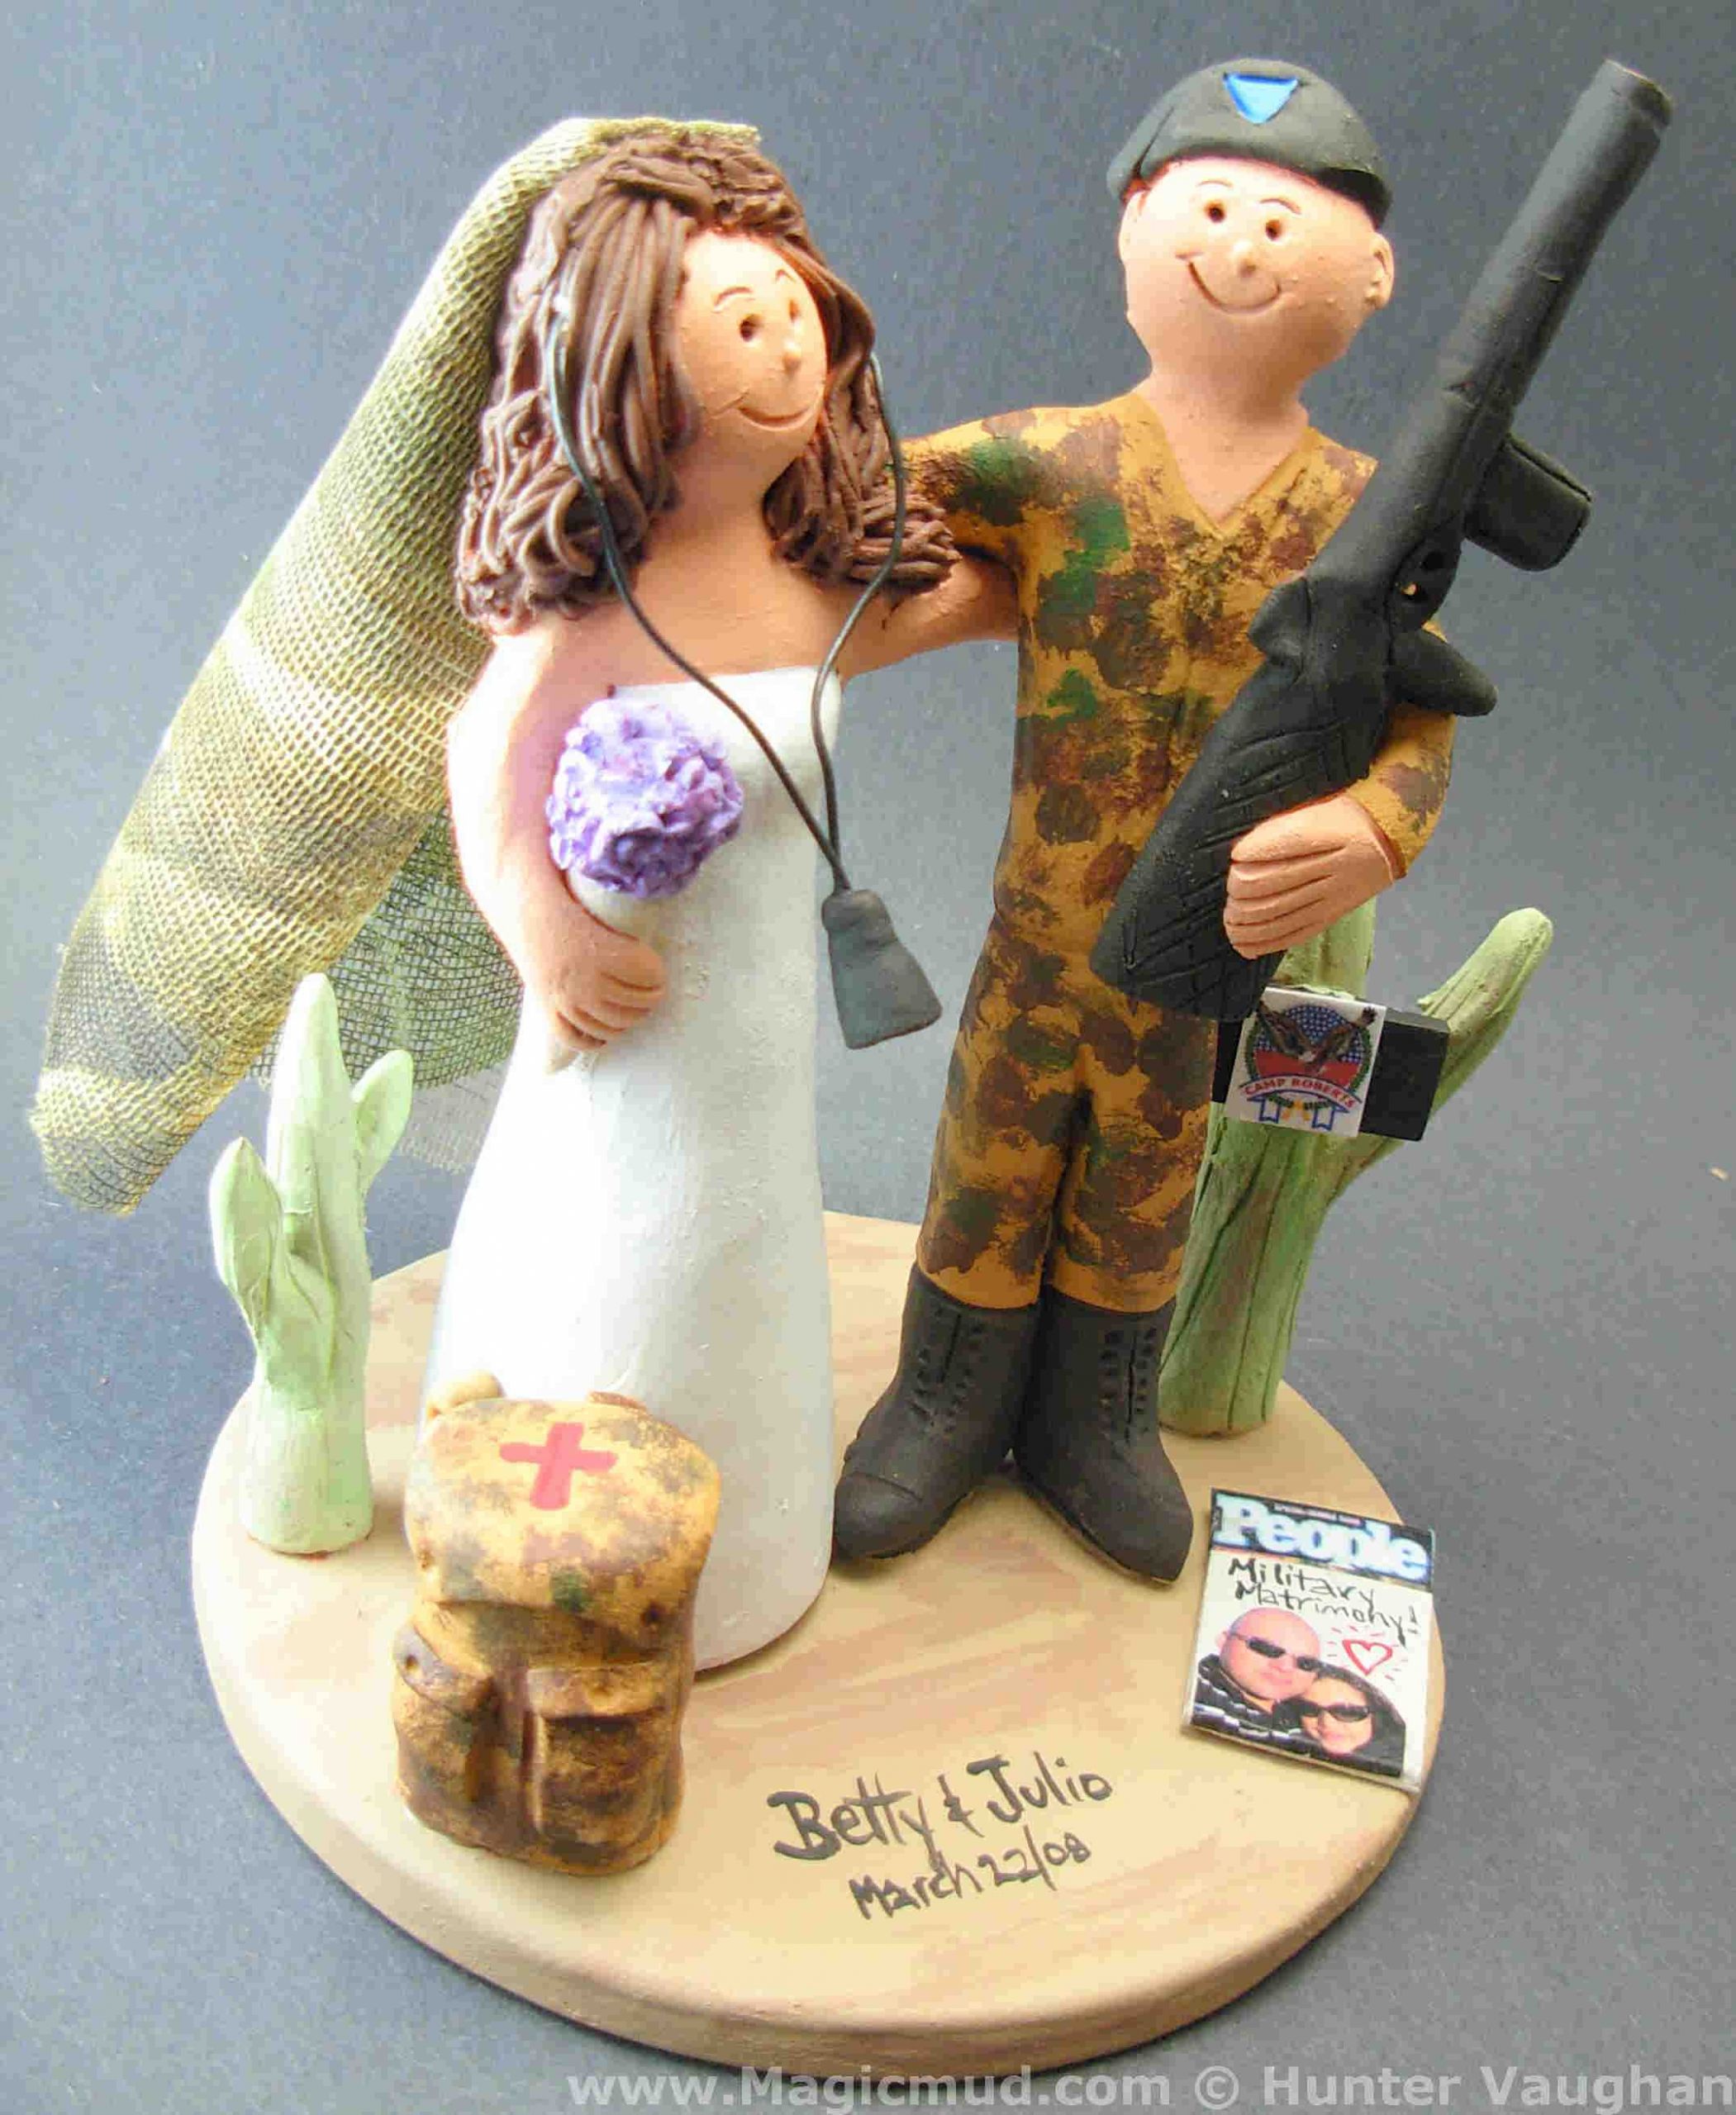 Military Wedding Cake Toppers
 US Military Wedding Cake Topper